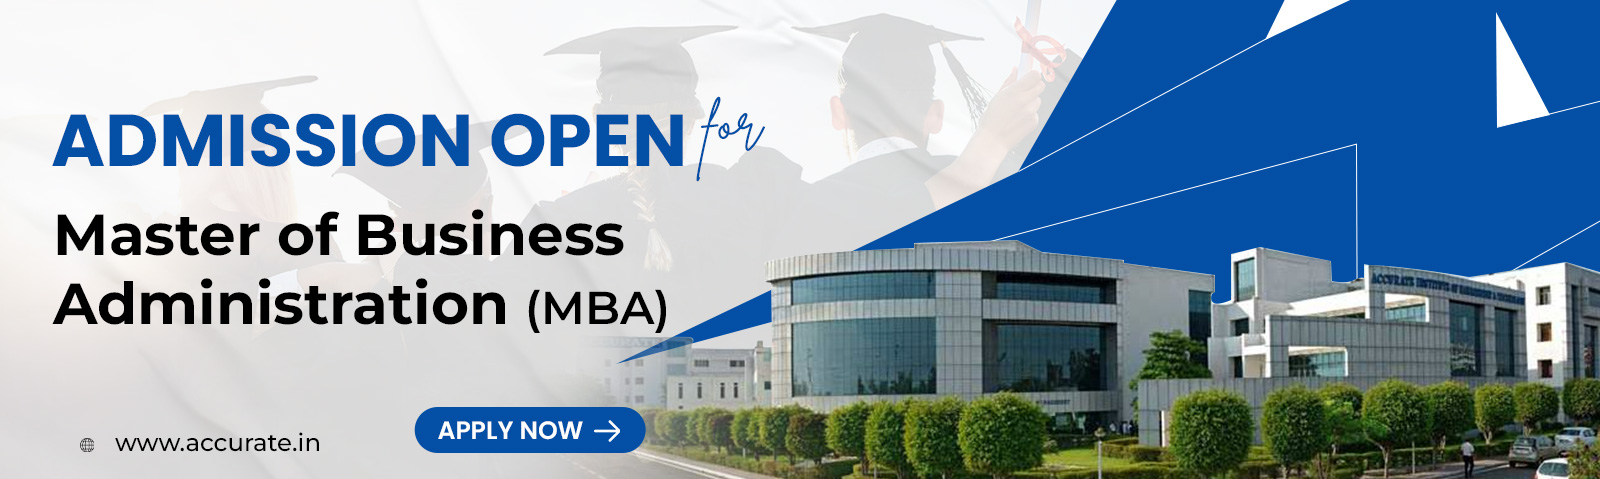 Apply Now Admission Open for MBA